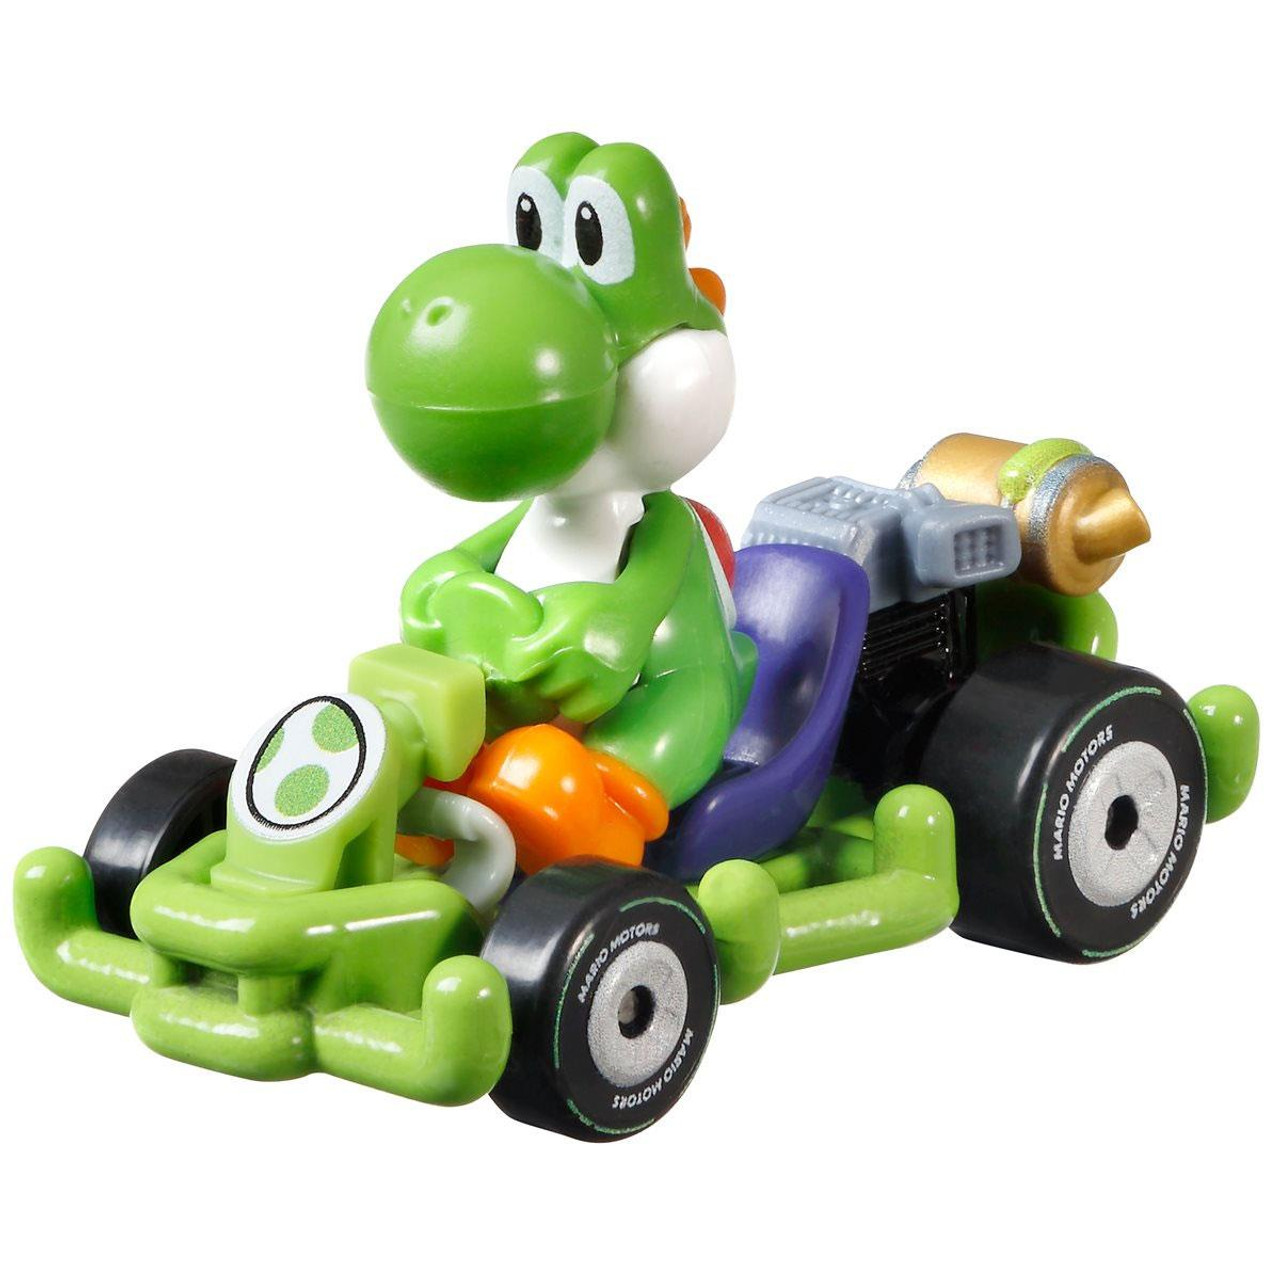 Hot Wheels Teams Up With Nintendo to Bring the World of Mario Kart to Fans  With New Die-cast Toy Line